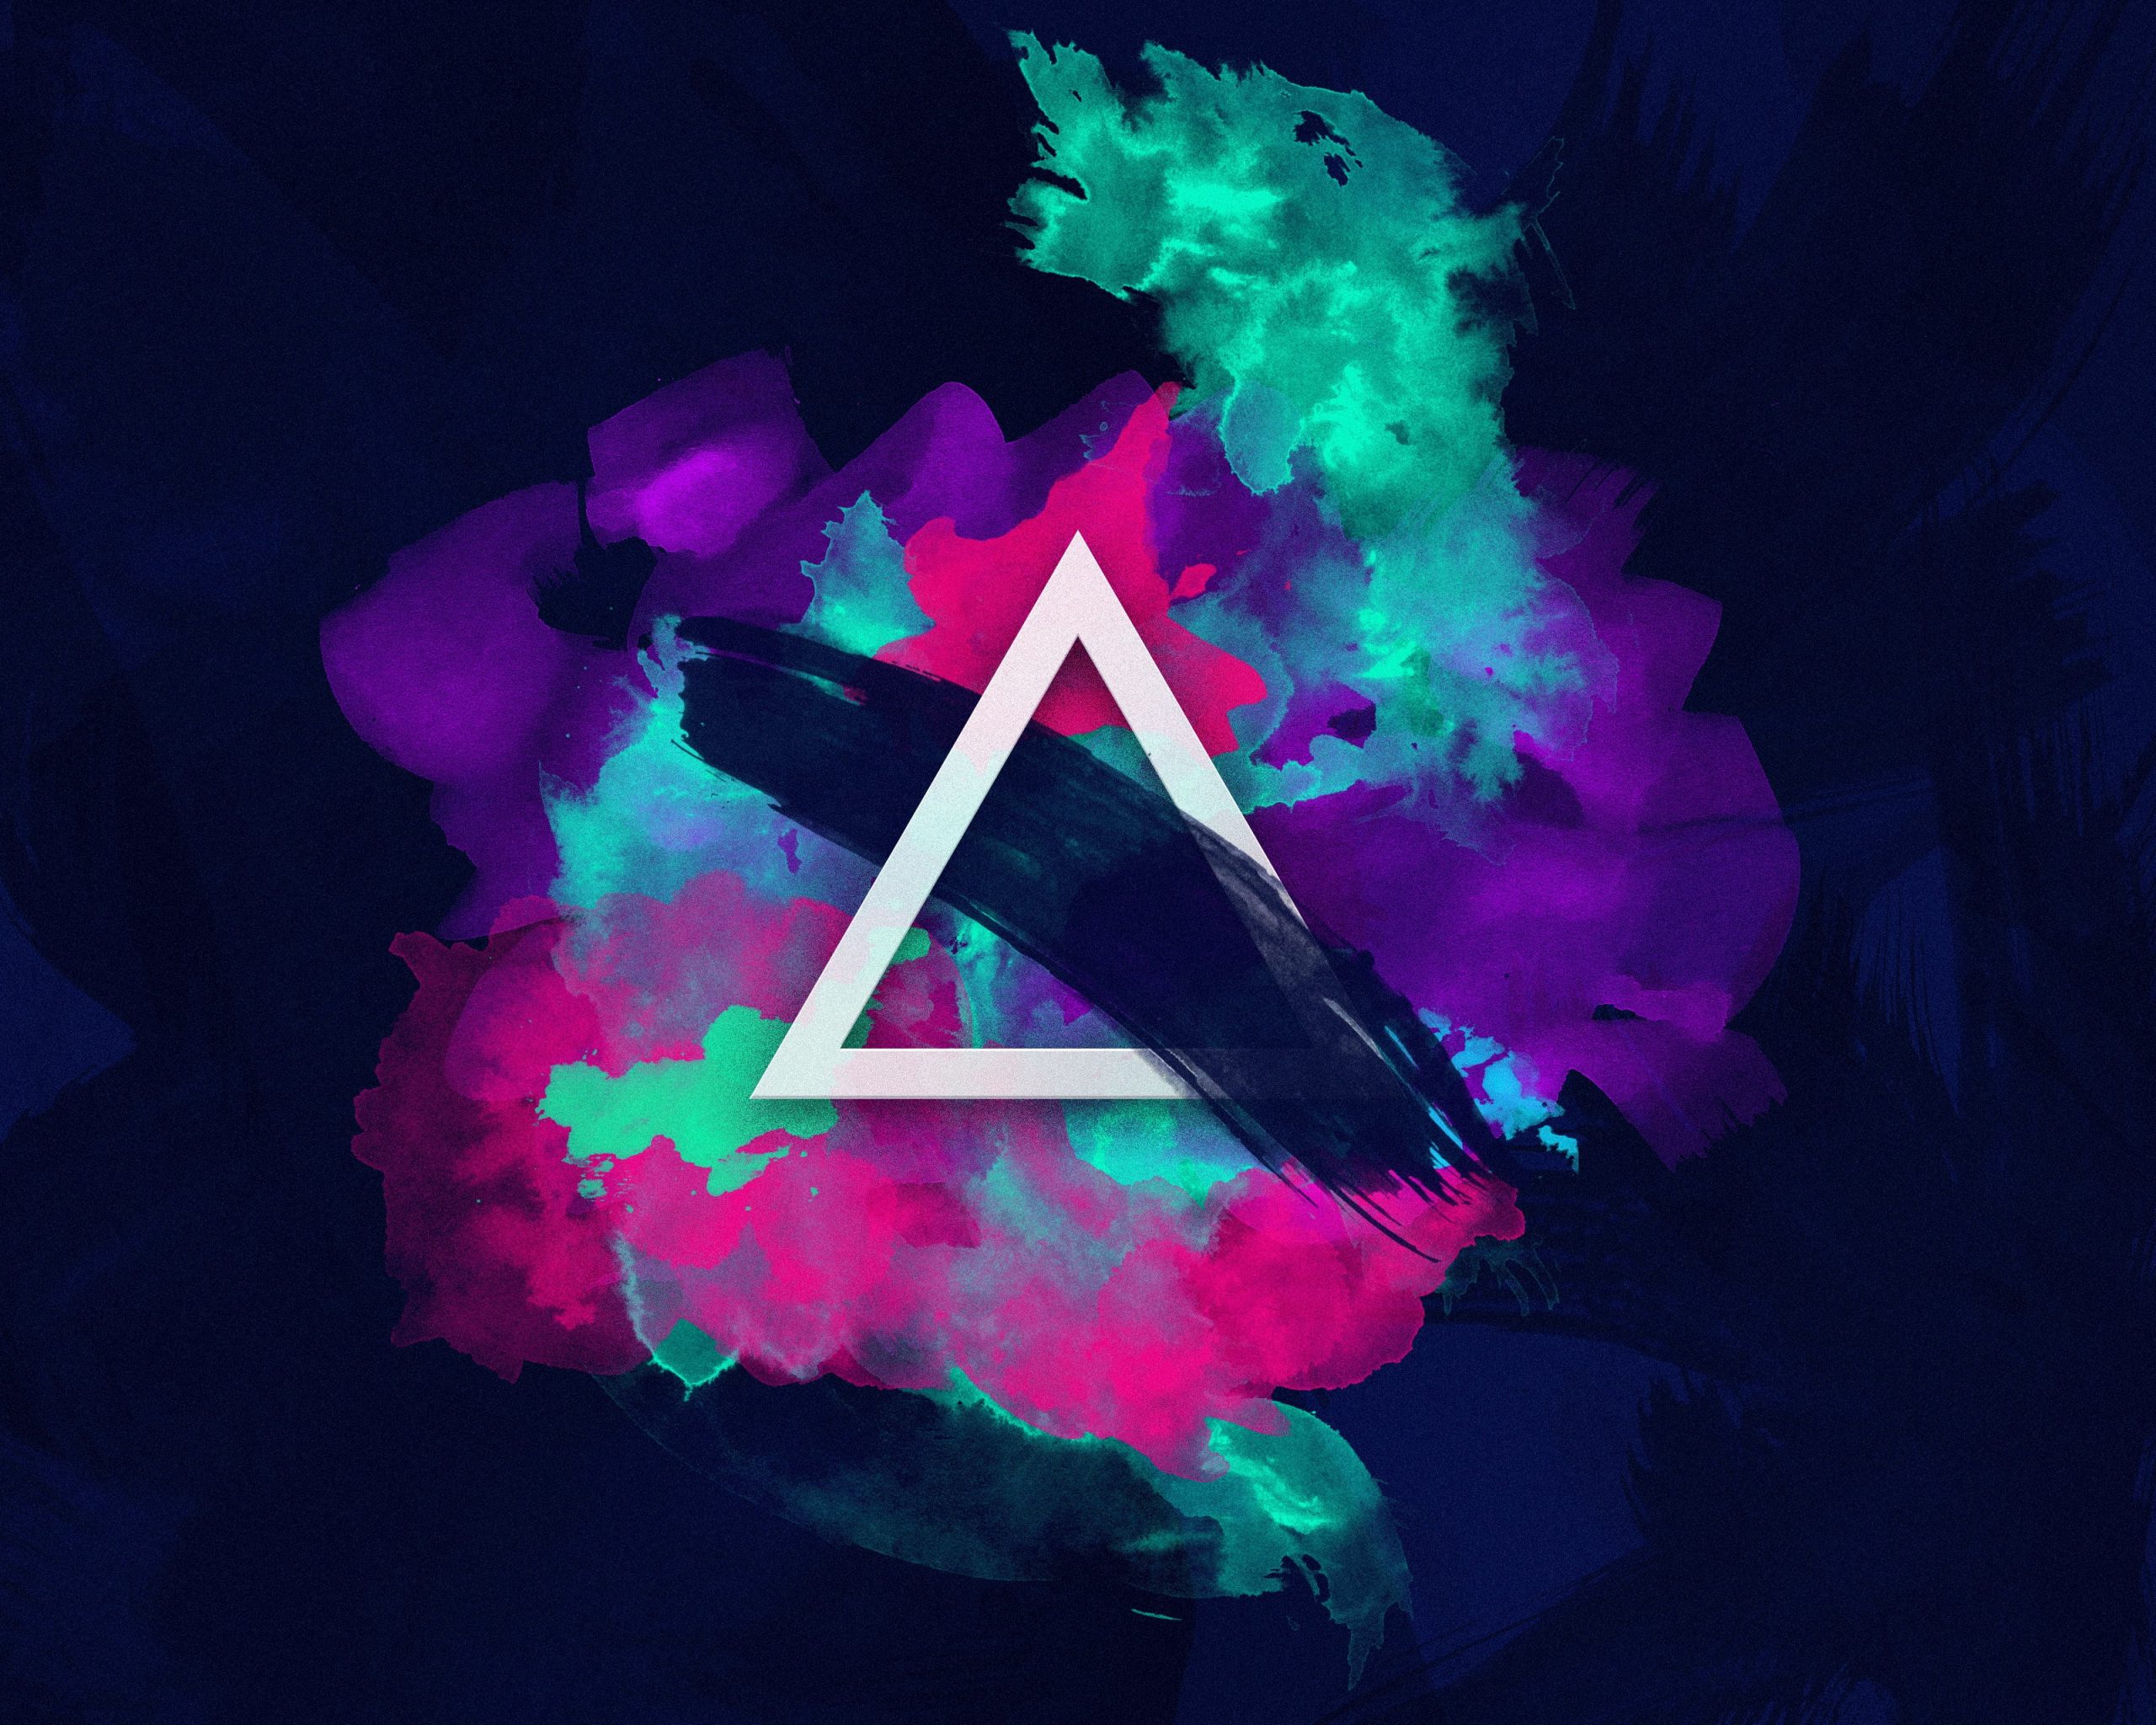 Multicolored triangle abstract art wallpaper